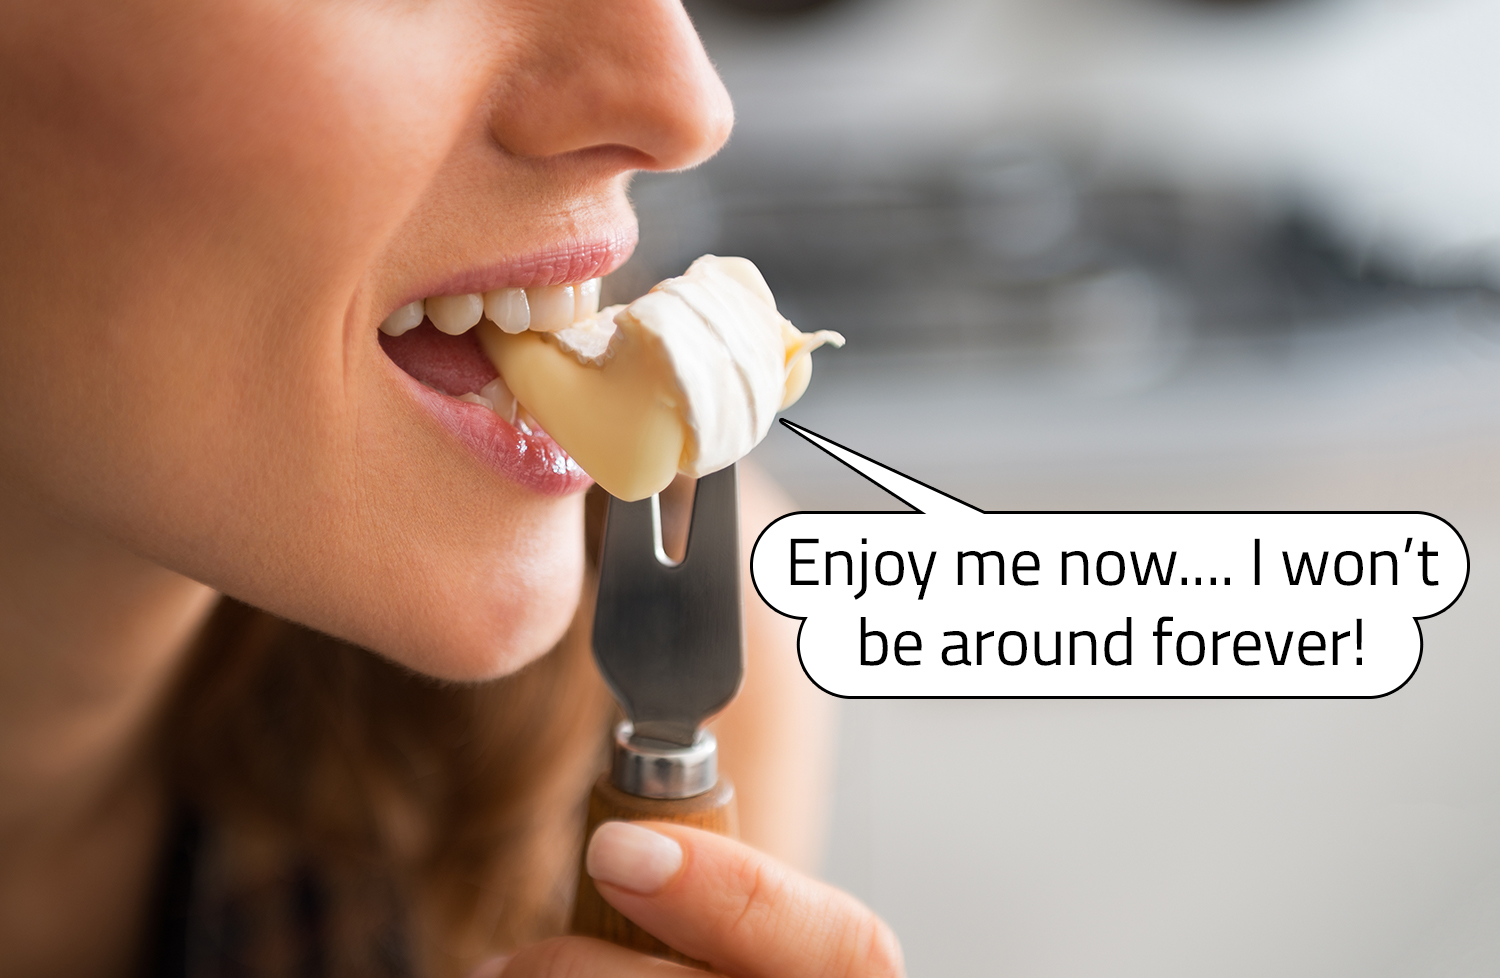 A woman is about to eat a piece of Camembert cheese that is saying “Enjoy me now. I won’t be around forever.”